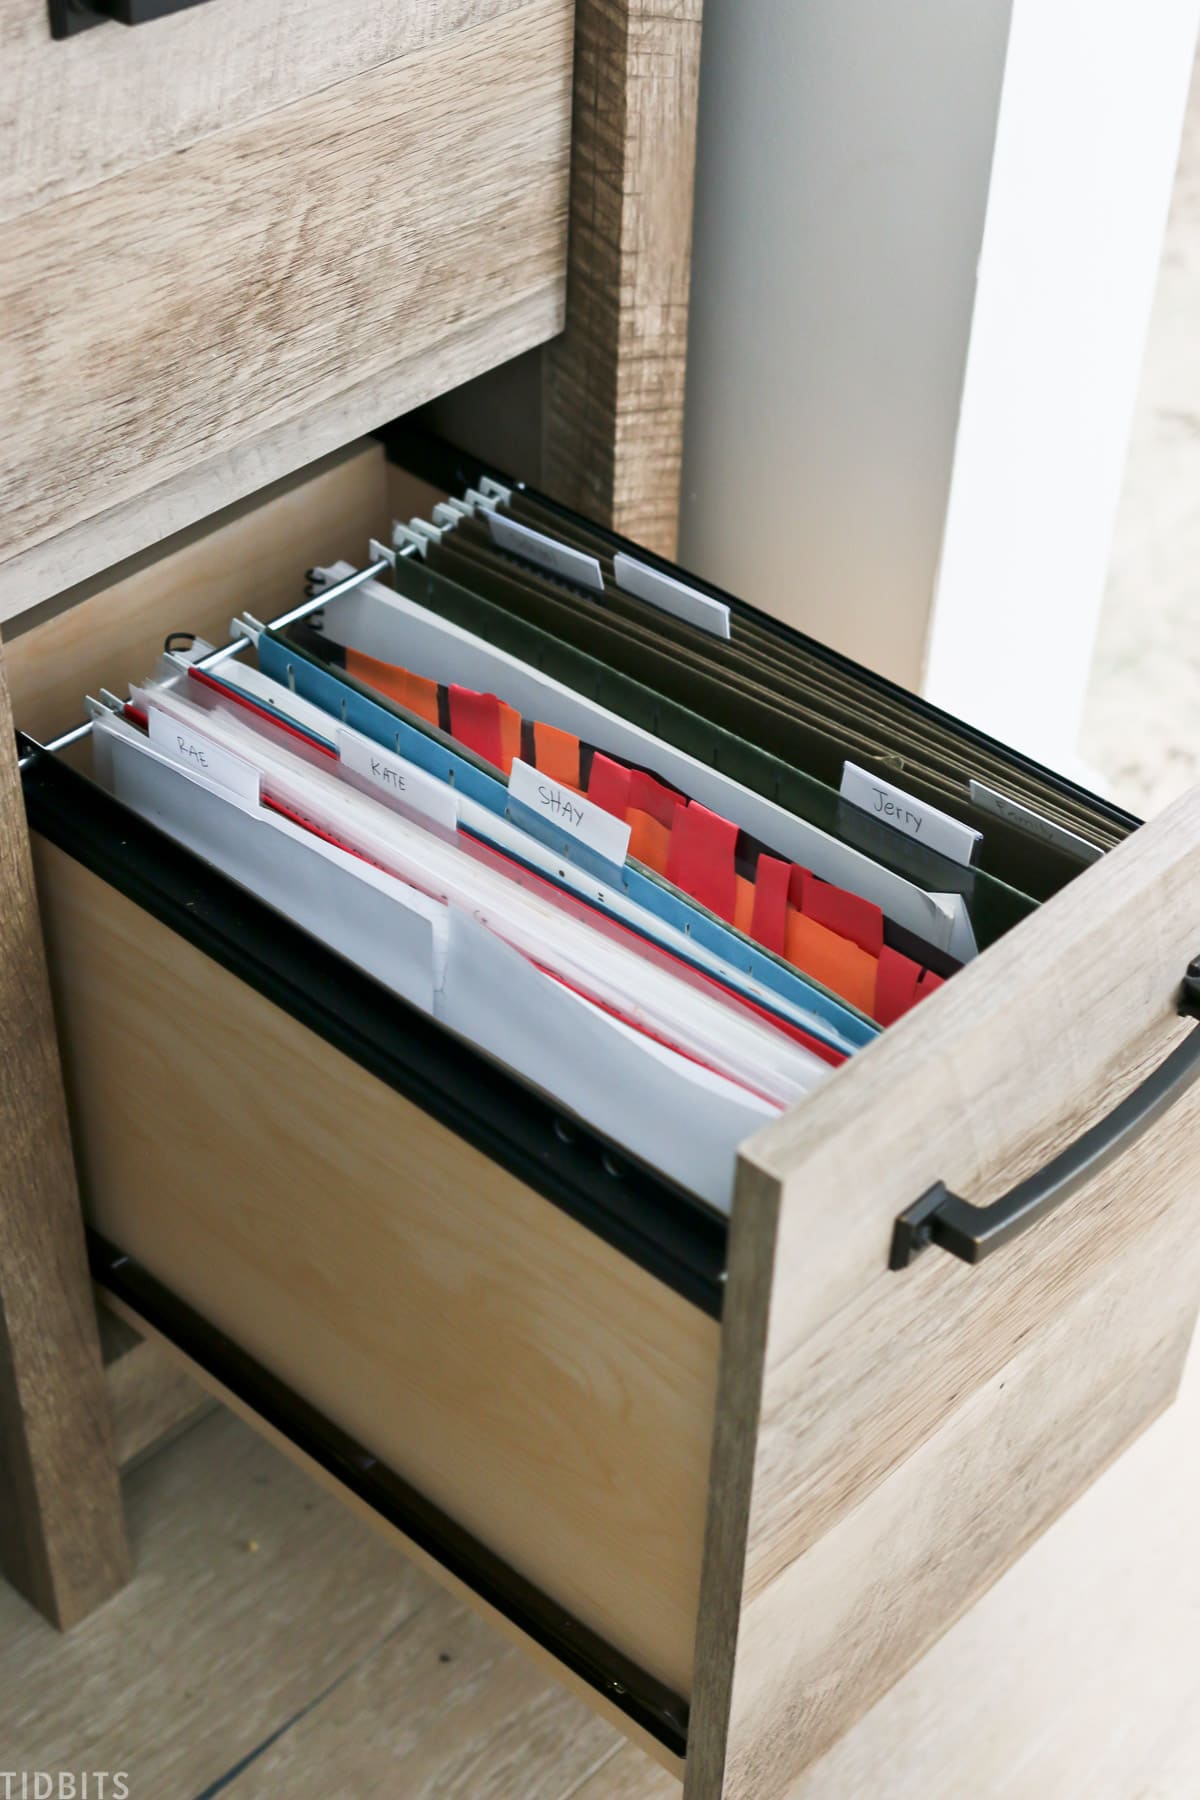 desk drawer is opened to reveal file folders